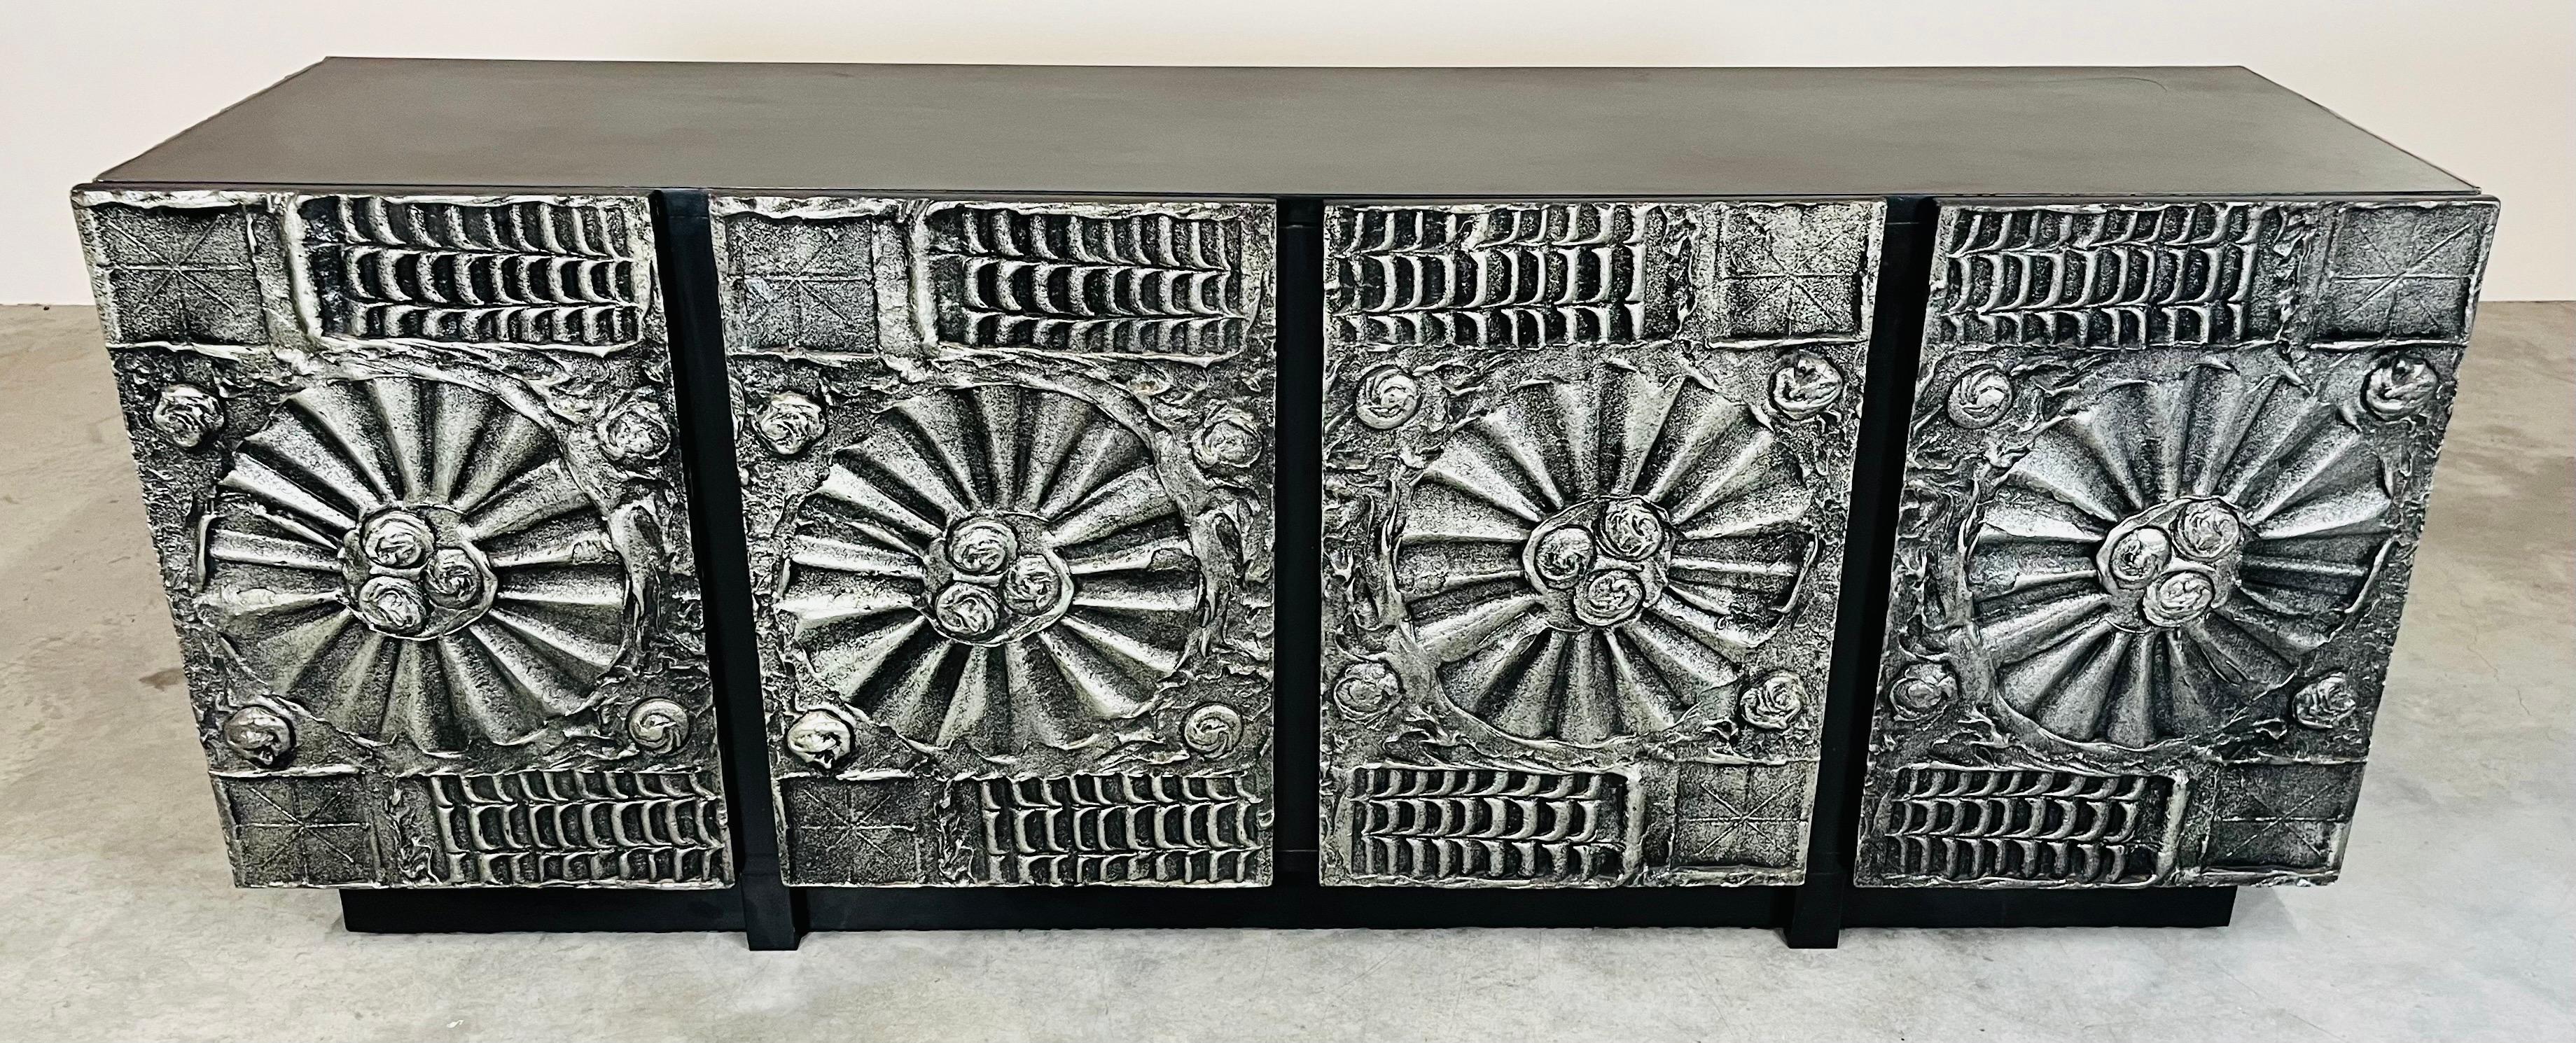 A stunning brutalist credenza designed by Adrian Pearsall in the manner of Paul Evans having 4 doors with a single center top drawer and ample shelf storage. Sculpted resin over wood with bronze color finish. A stunning design and the larger